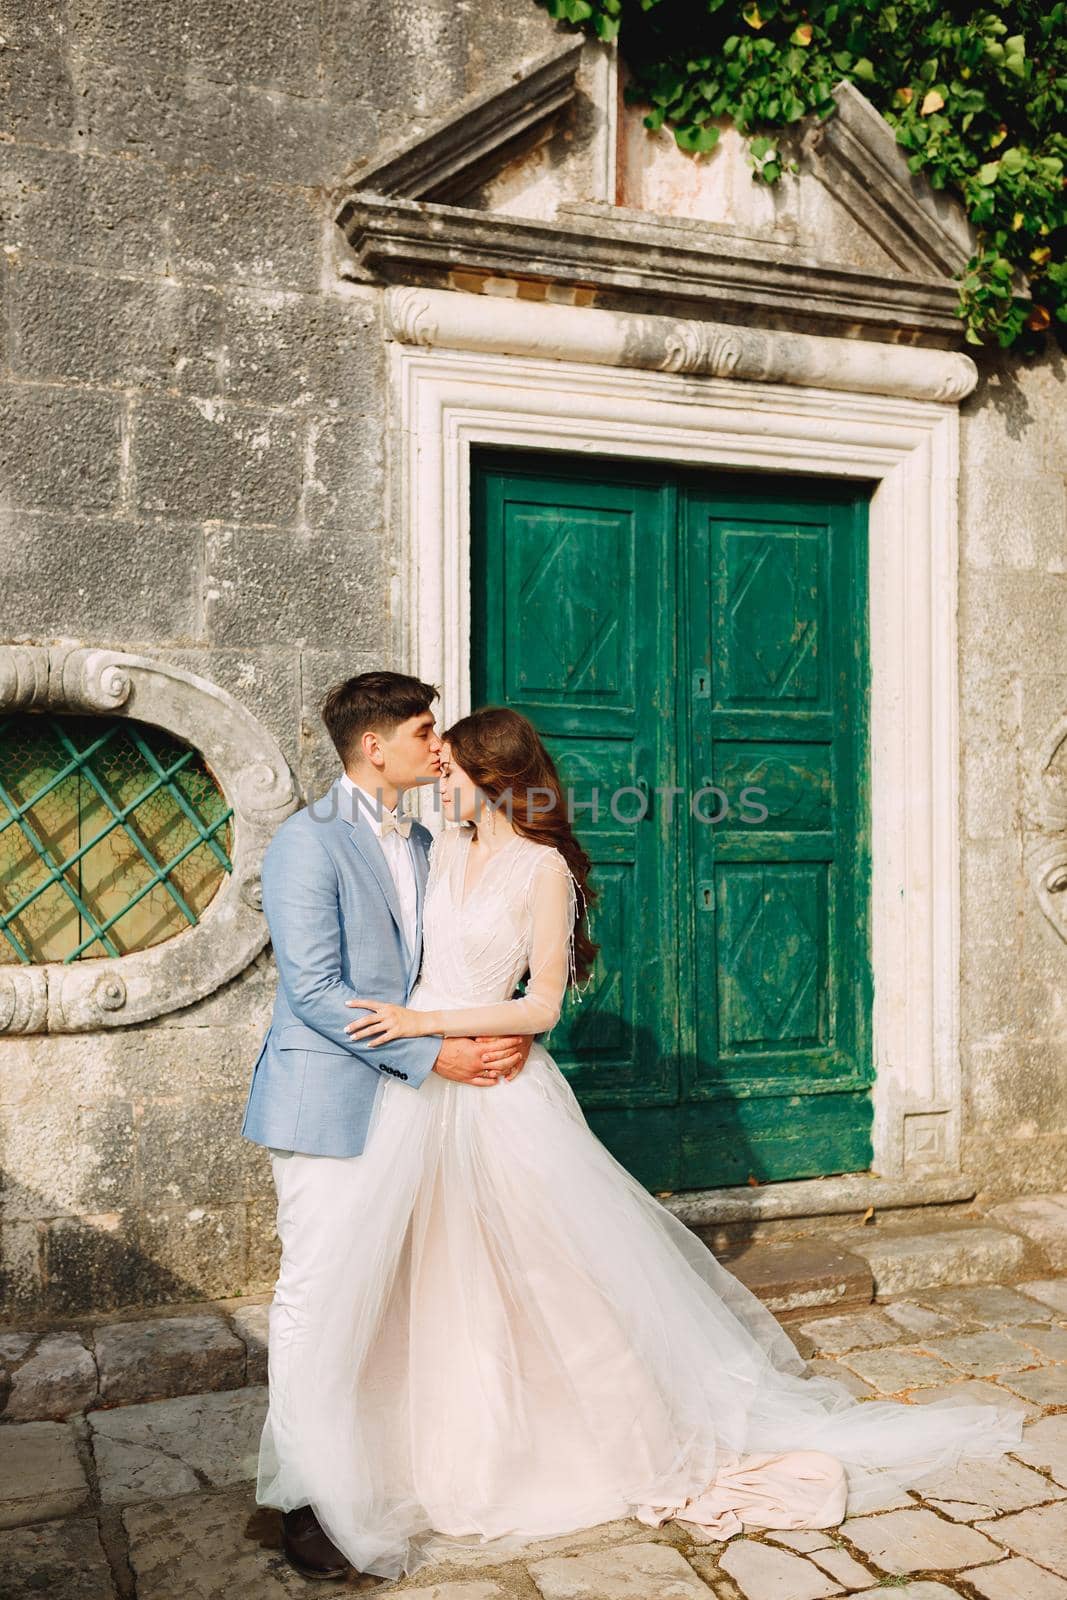 The bride and groom are embracing at the wooden door of an ancient building in Perast, the groom kisses the bride on the forehead . High quality photo